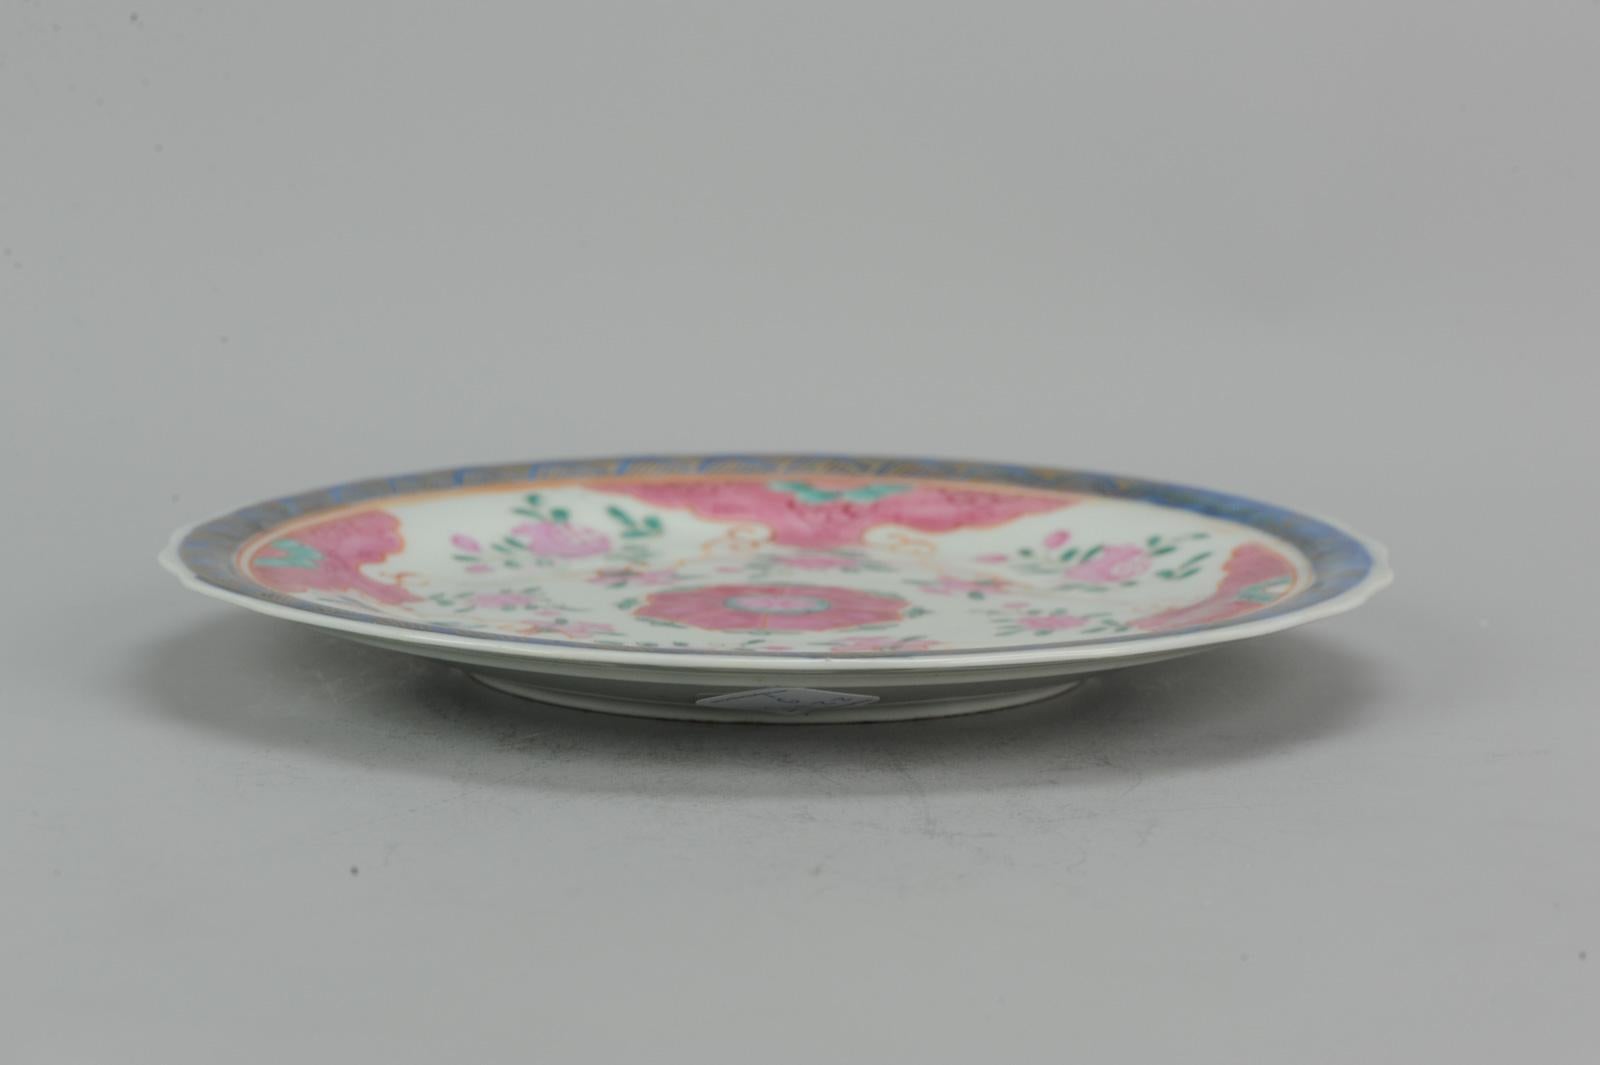 Antique Chinese Porcelain Pre Bencharong Famille Rose Plate, ca 1800 In Good Condition For Sale In Amsterdam, Noord Holland